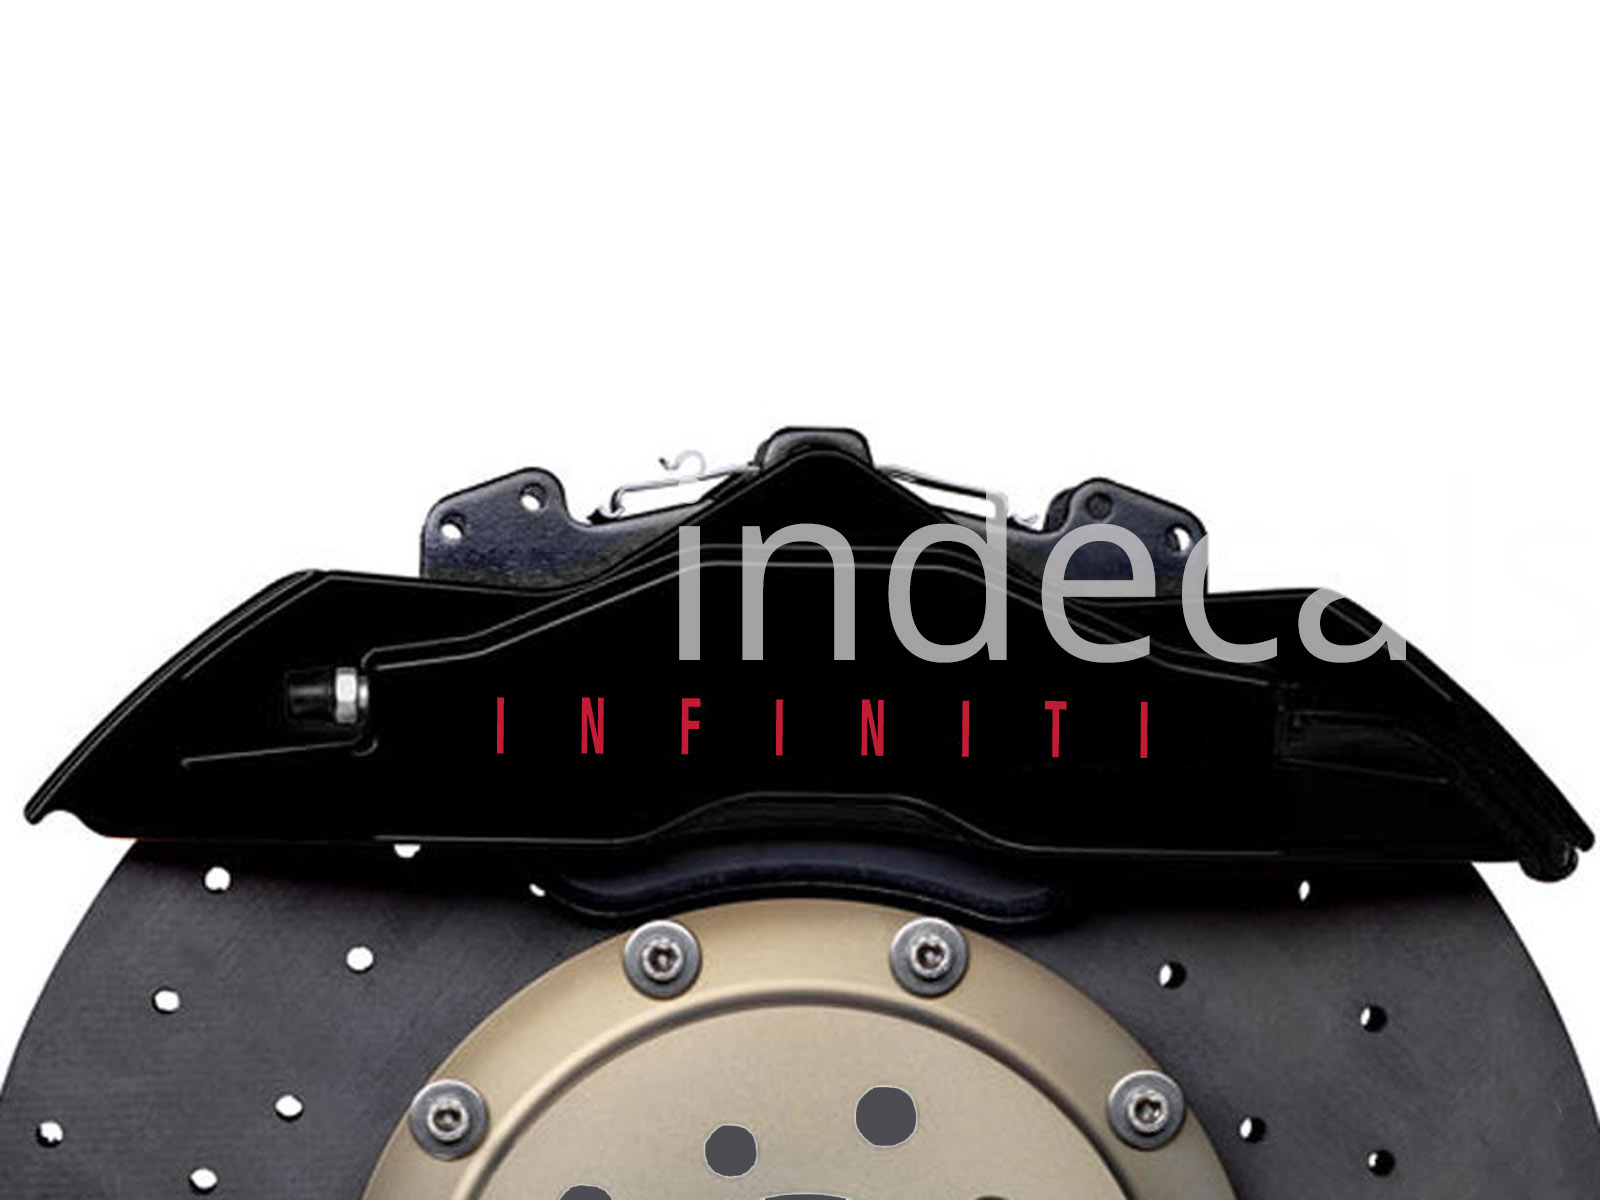 6 x Infiniti Stickers for Brakes - Red